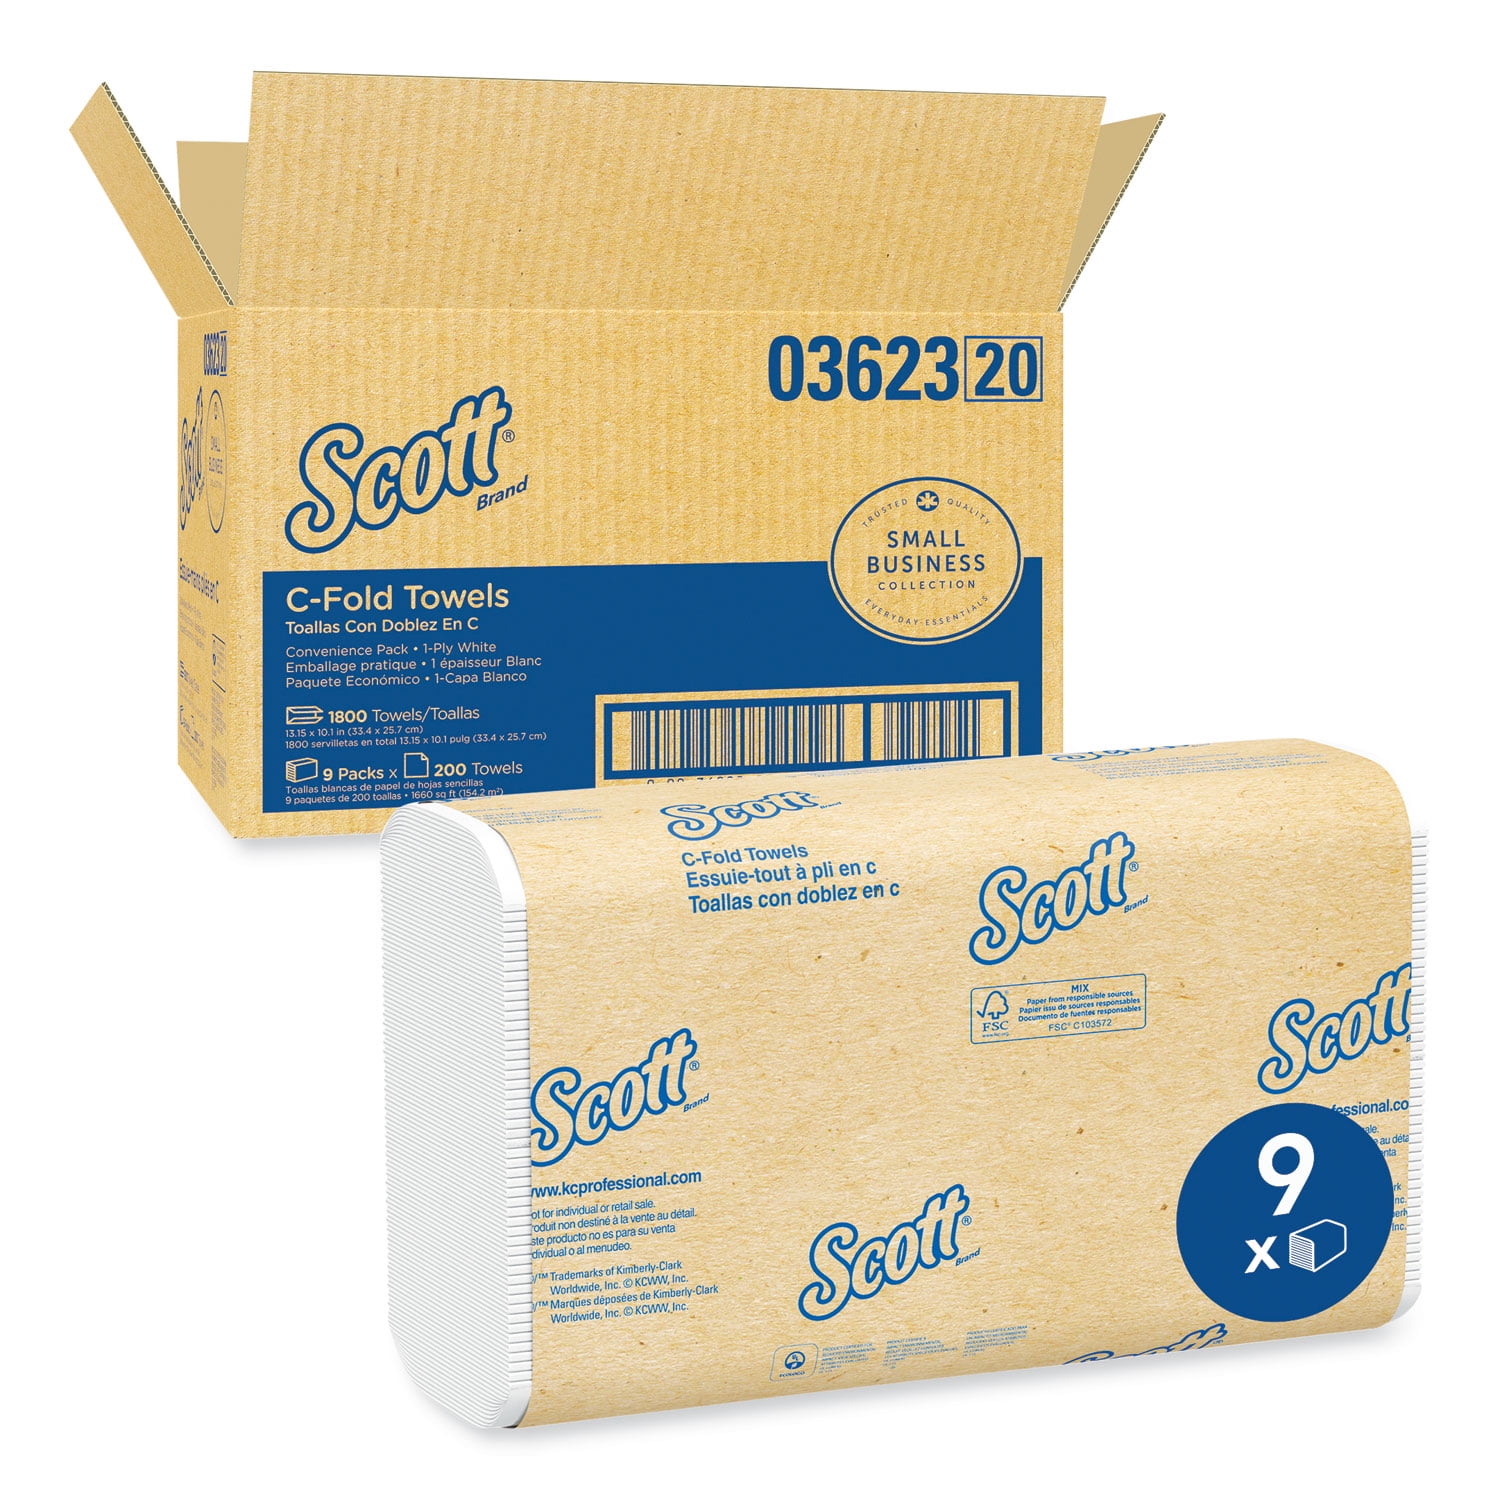 Case of 12 Kimberly Clark 01510 2400 Scott Paper Towel C-Fold 200 Count Pack 